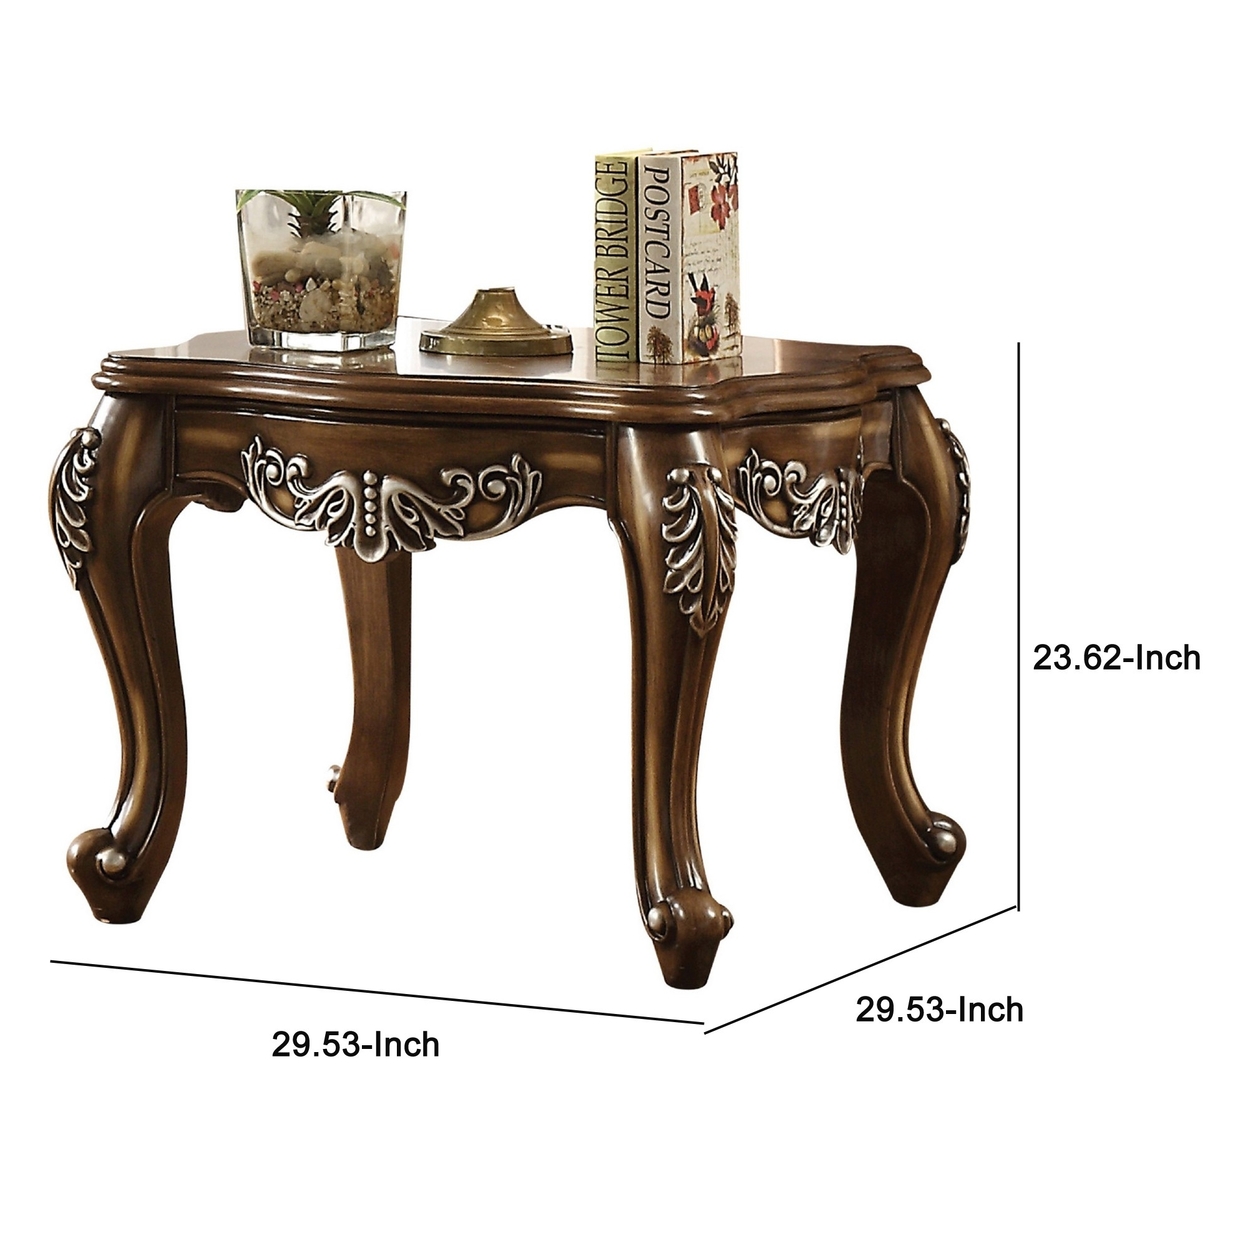 Wooden End Table With Fine Scrolled Work, Antique Oak Brown- Saltoro Sherpi